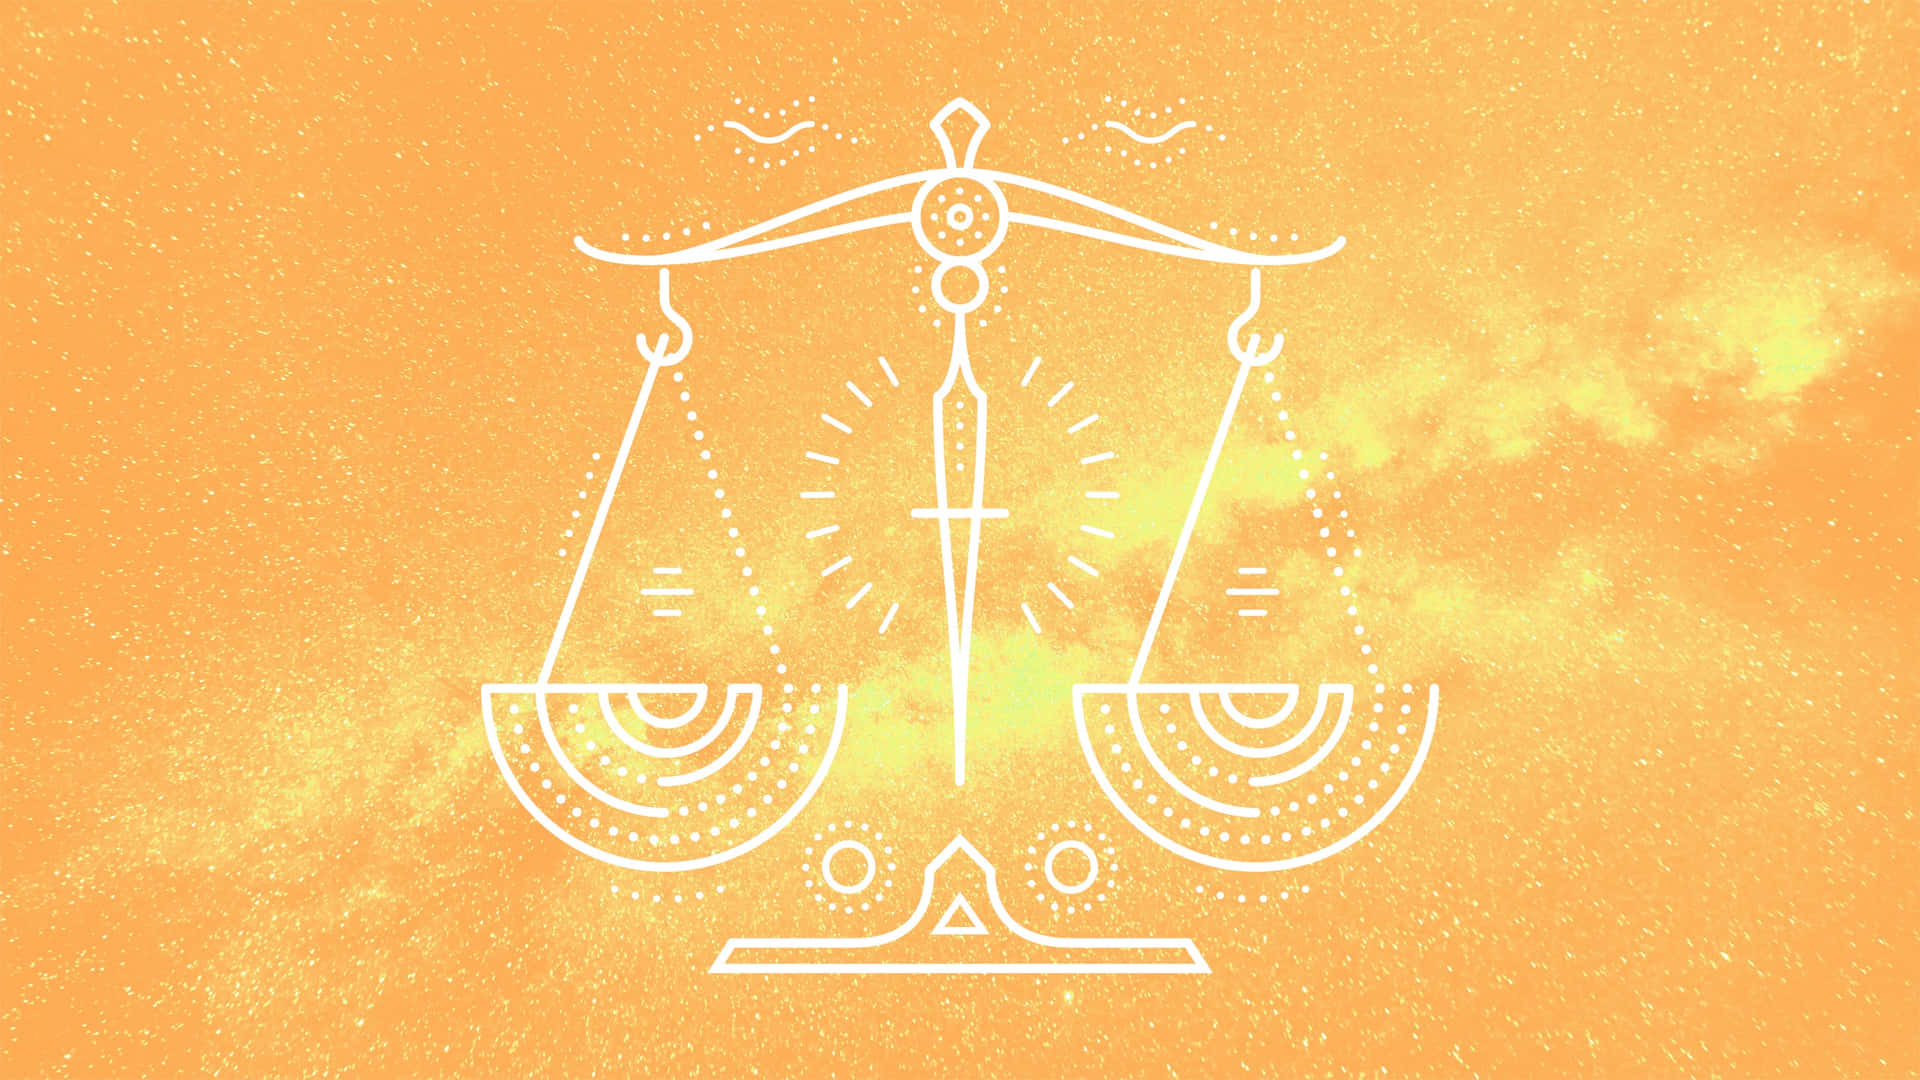 A Scales Of Justice Symbol On An Orange Background